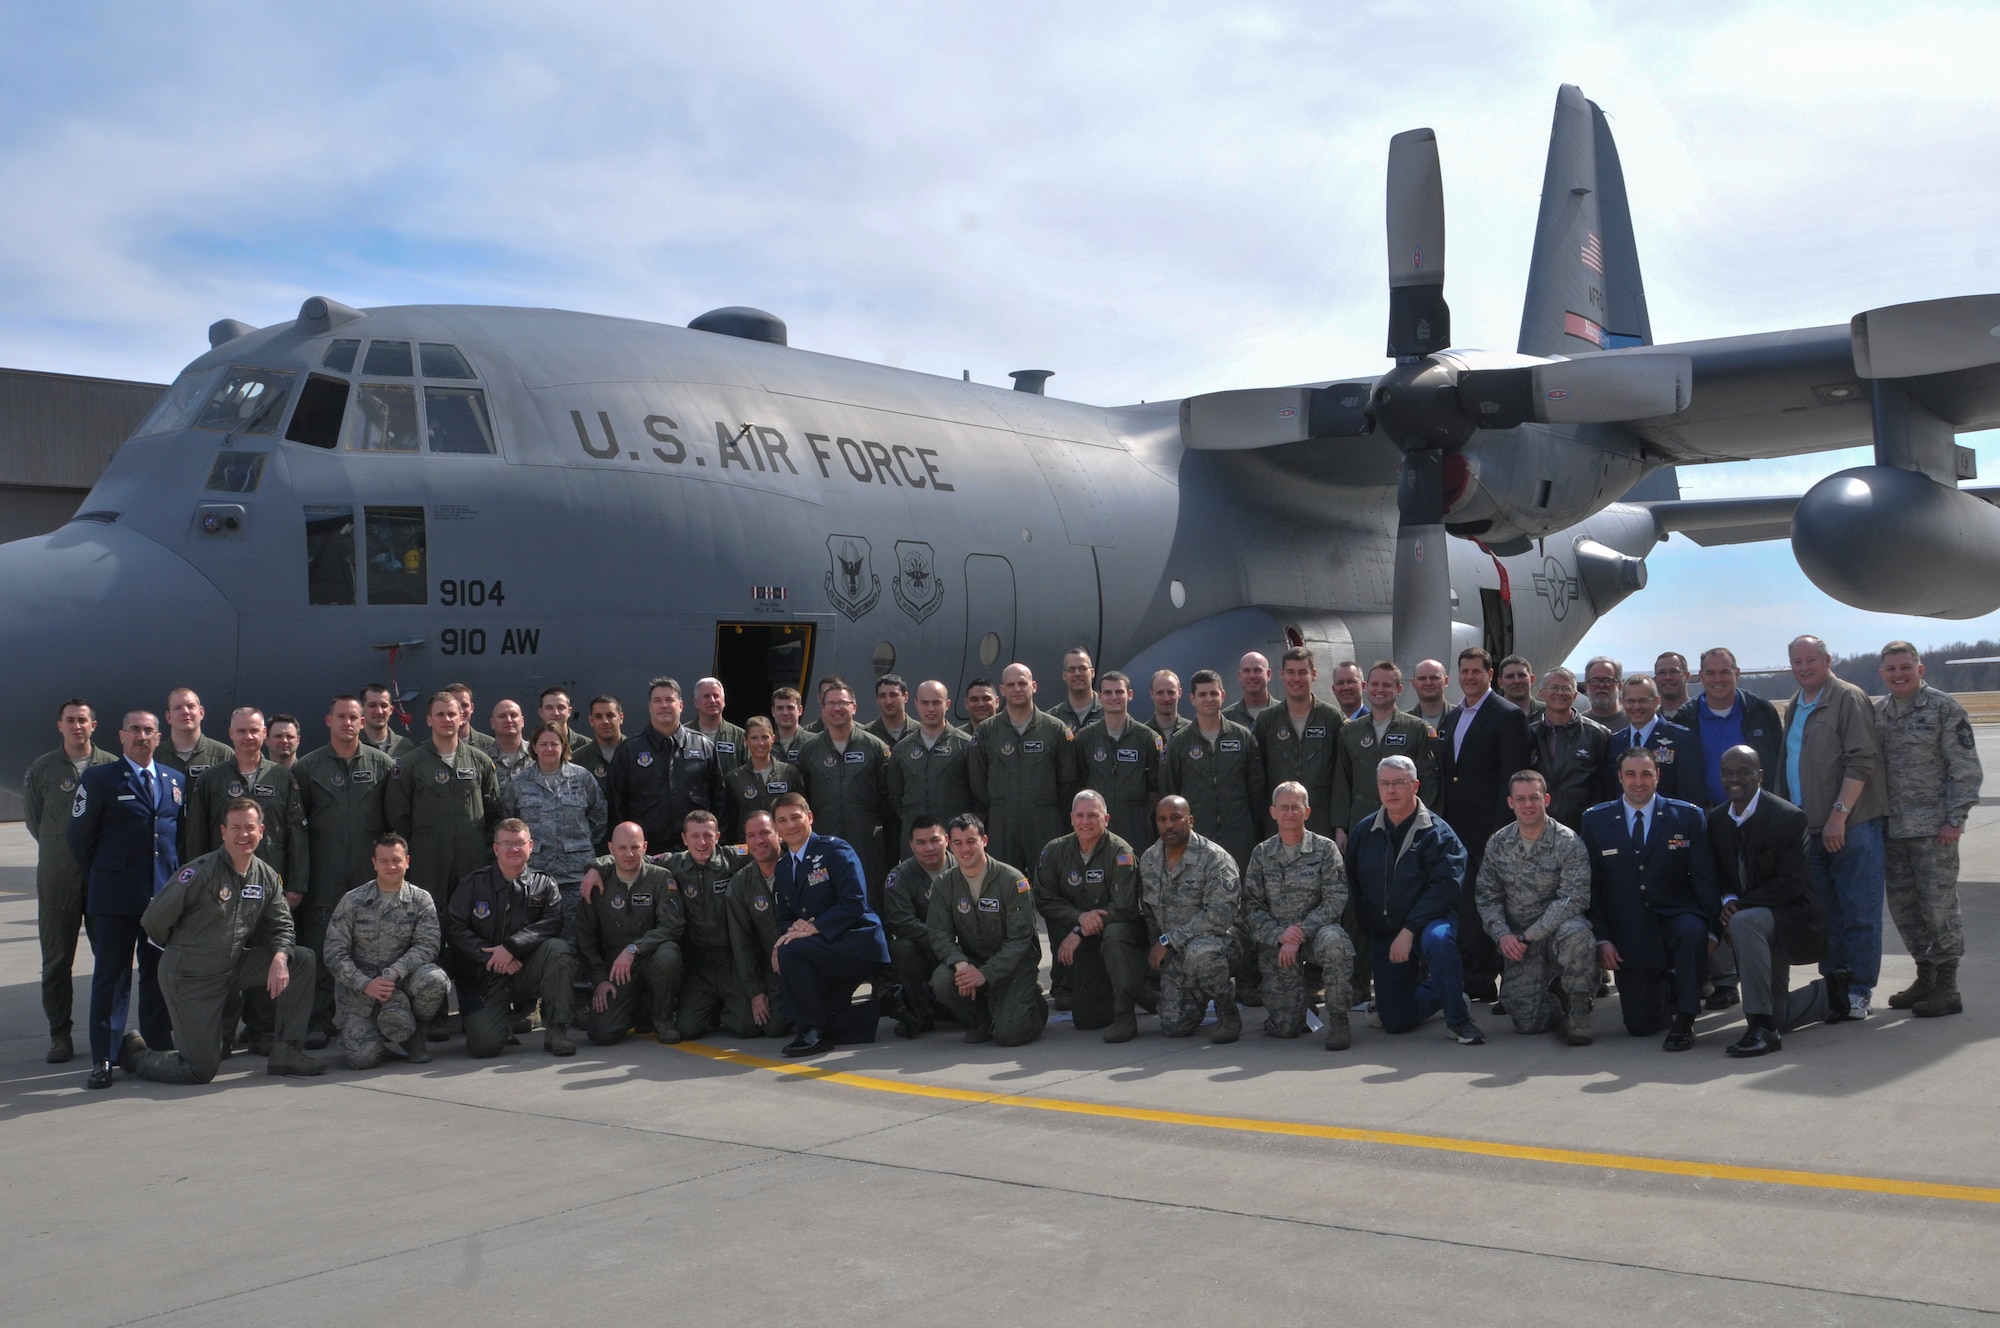 Past and present members of the 773rd Airlift Squadron pose in front of a C-130 Hercules aircraft here, April 6, following the unit’s deactivation ceremony. The squadron, which was activated as a unit of the 910th Airlift Wing in 1995, was officially deactivated on March 31. The deactivation resulted from Air Force structure changes that reduced the 910th’s C-130 aircraft fleet to eight Primary Assigned Aircraft and on Back-up Inventory Aircraft. U.S. Air Force photo/Tech. Sgt. Rick Lisum.